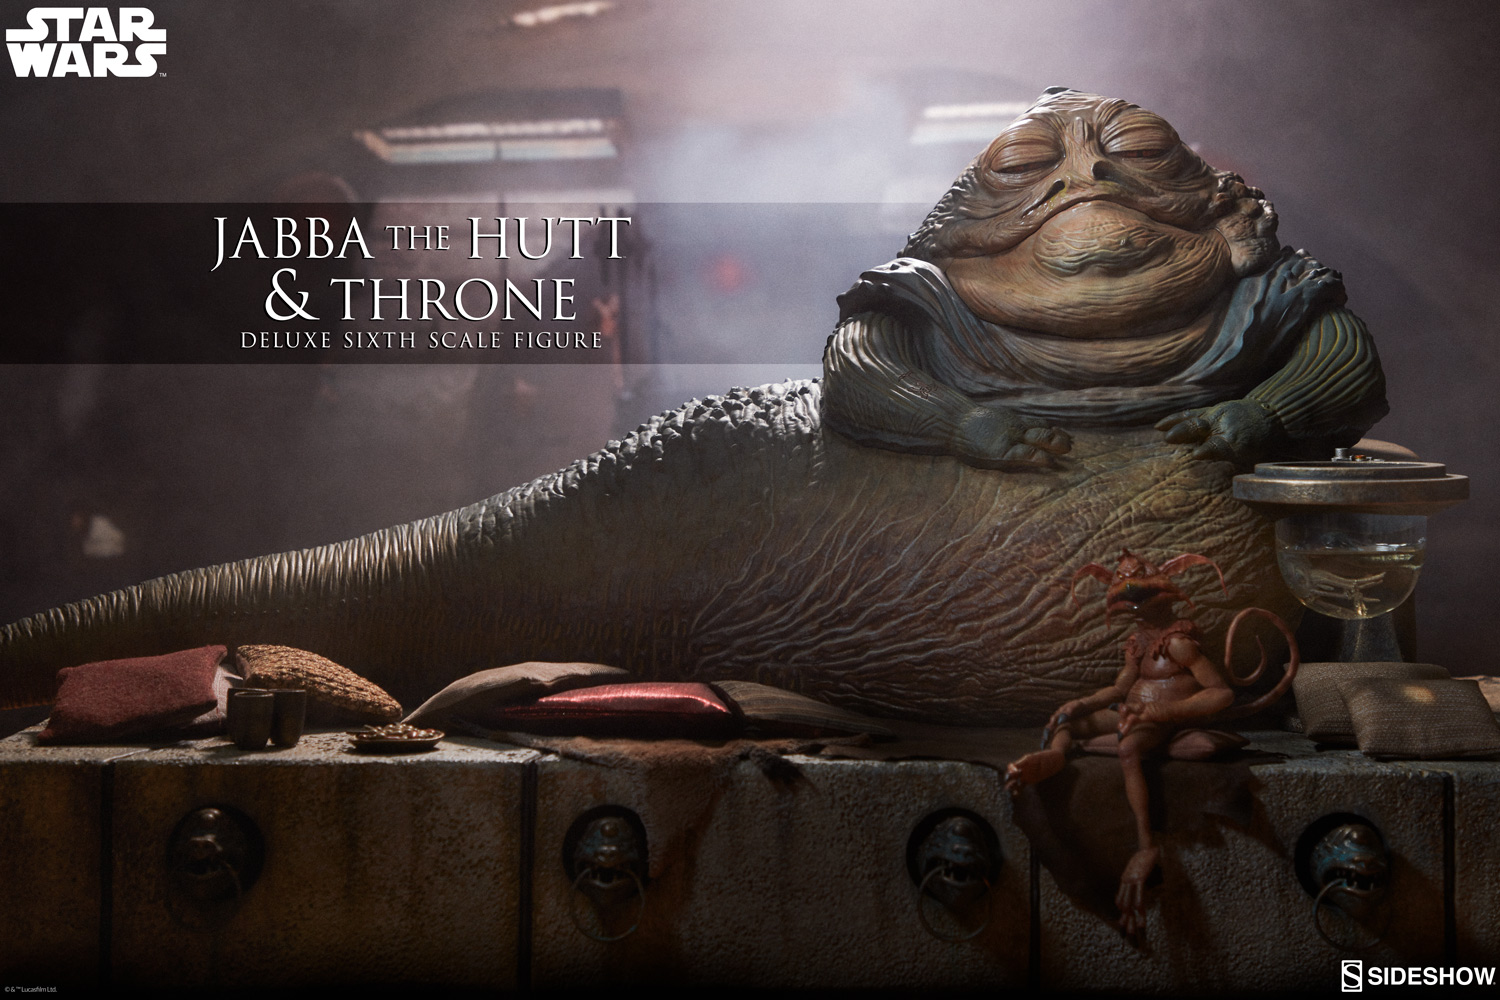 star-wars-jabba-the-hutt-and-throne-deluxe-sixth-scale-figure-sideshow-100410-01